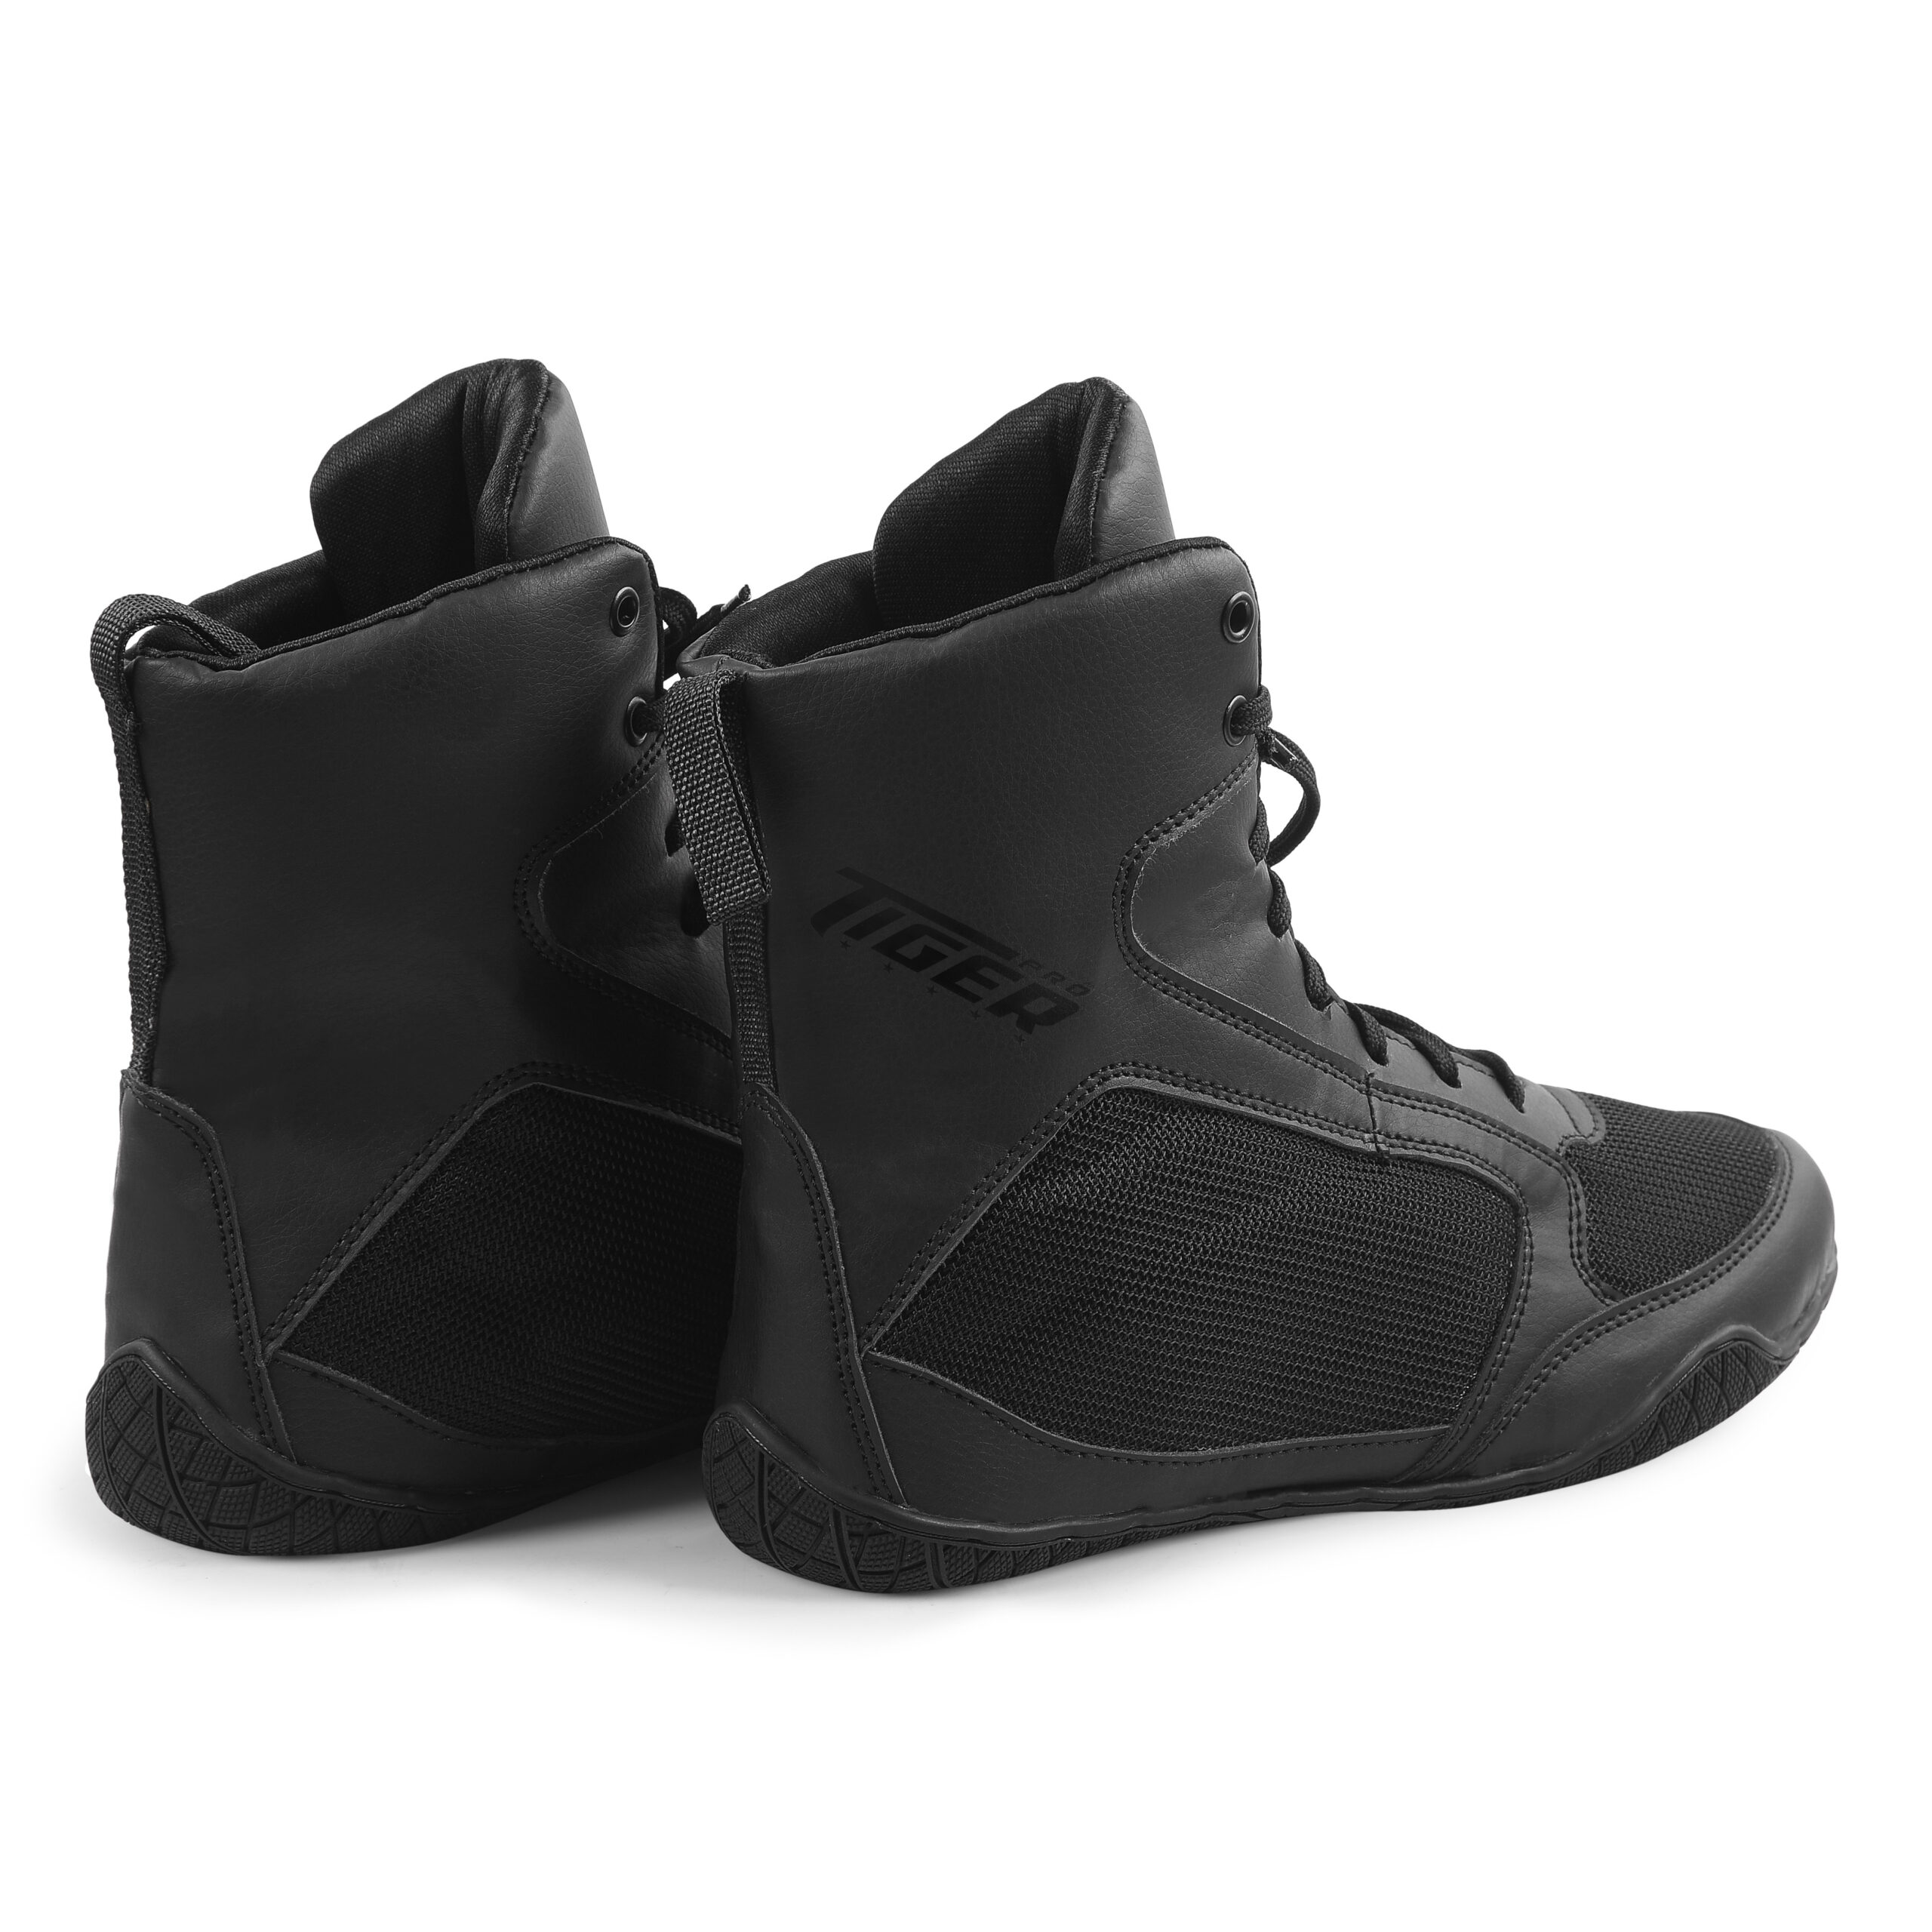 Boxing Boots for Men & Women